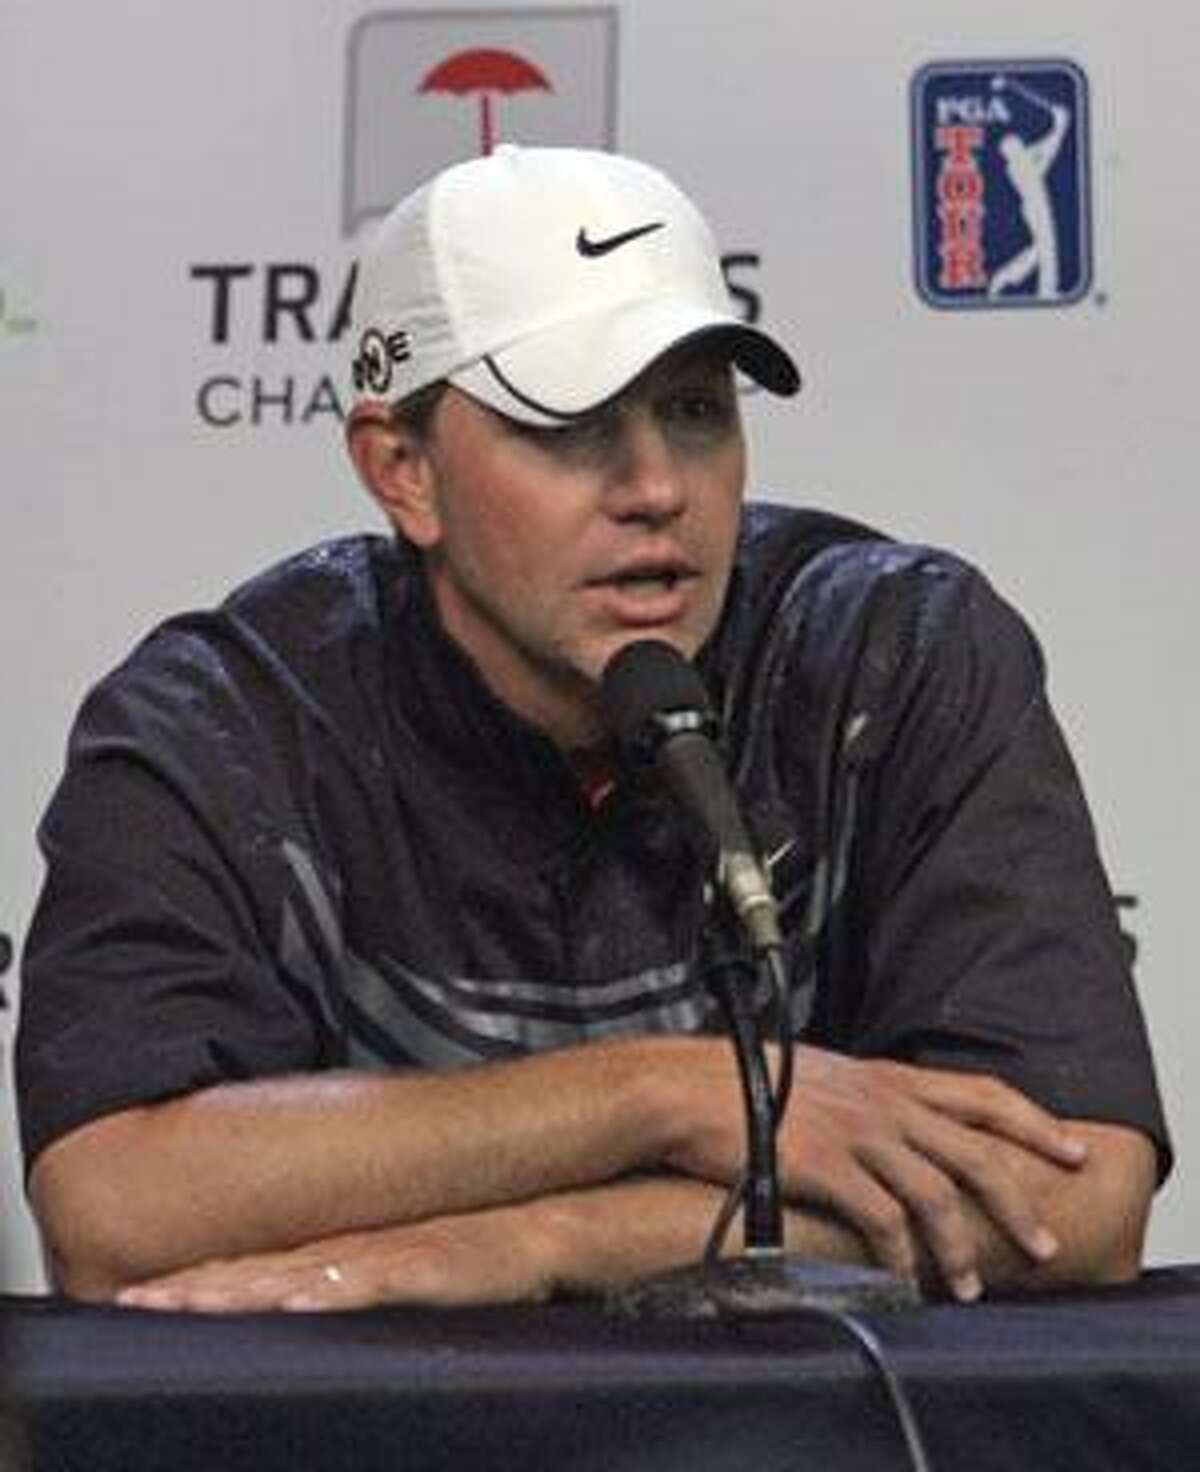 Lucas Glover, the 2009 U.S. Open champion, speaks to reporters during a news conference before the start of the pro-am event of the Travelers Championship golf tournament at the TPC at River Highlands golf course Wednesday in Cromwell.